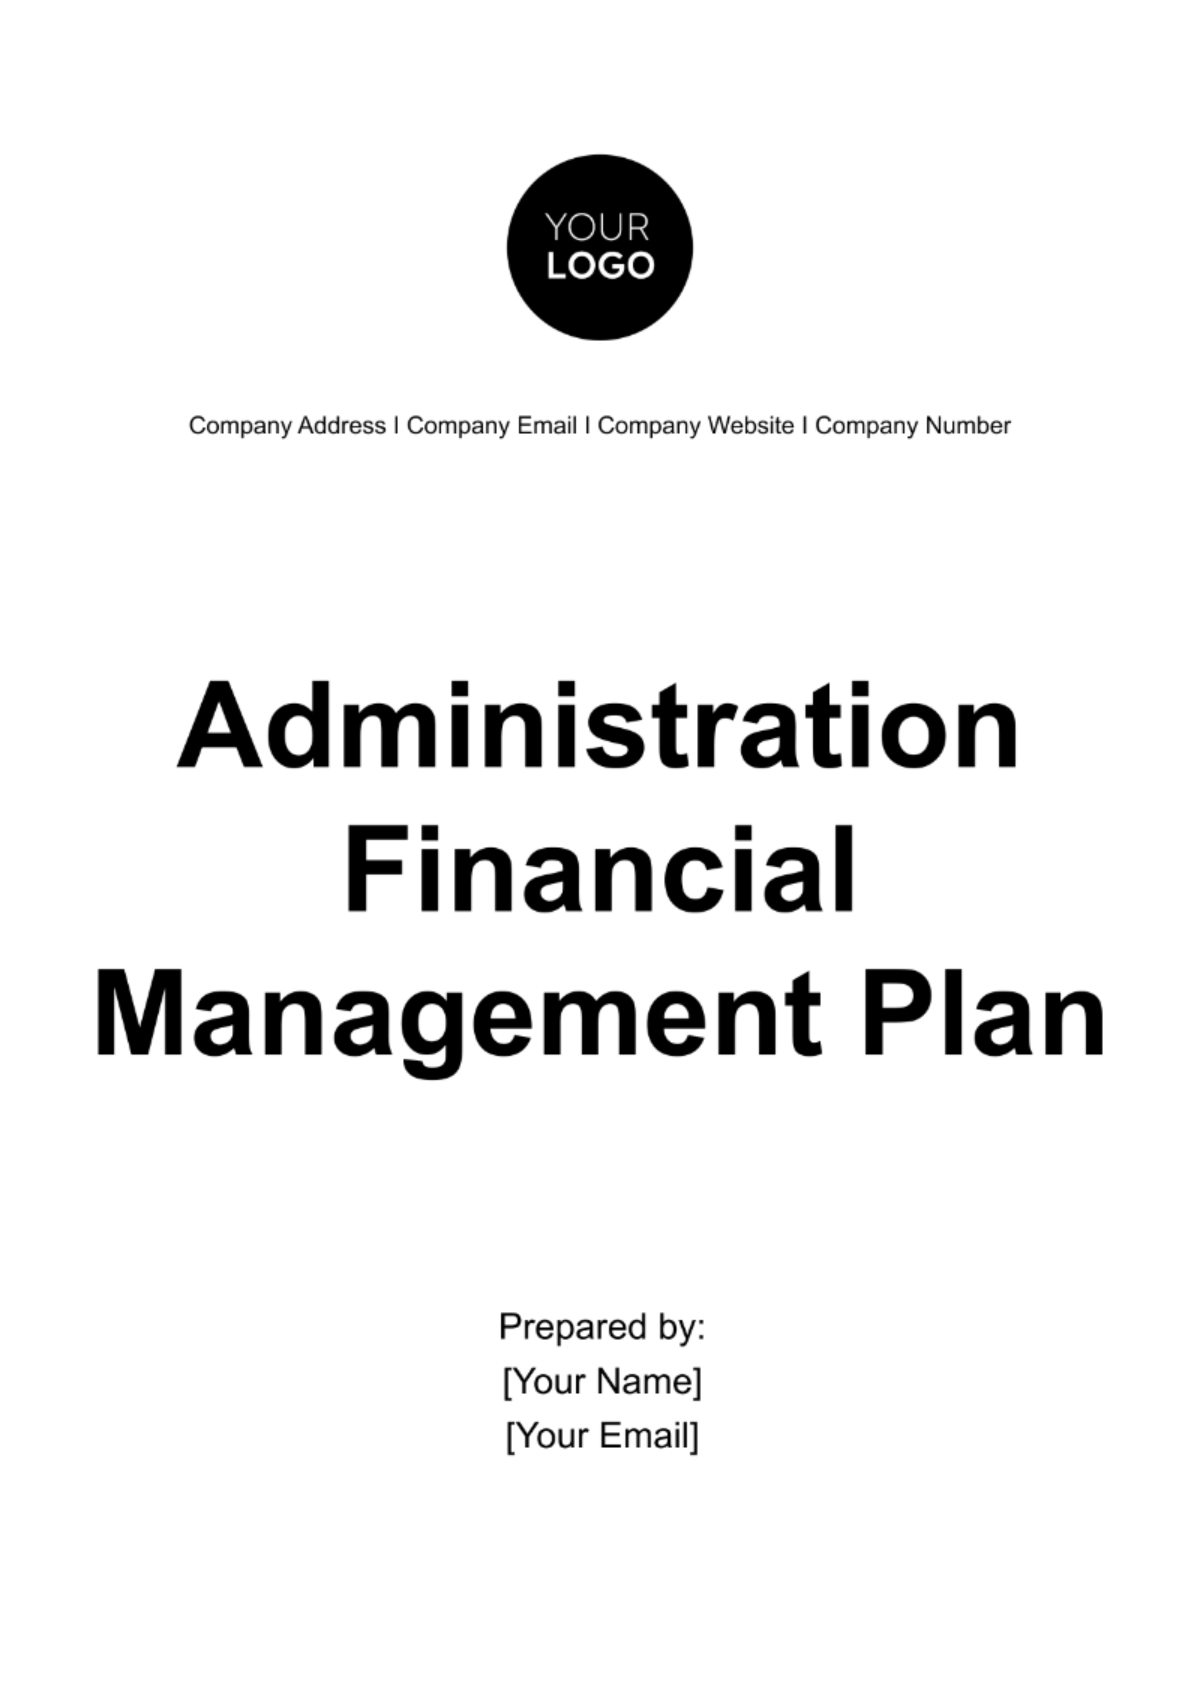 Administration Financial Management Plan Template